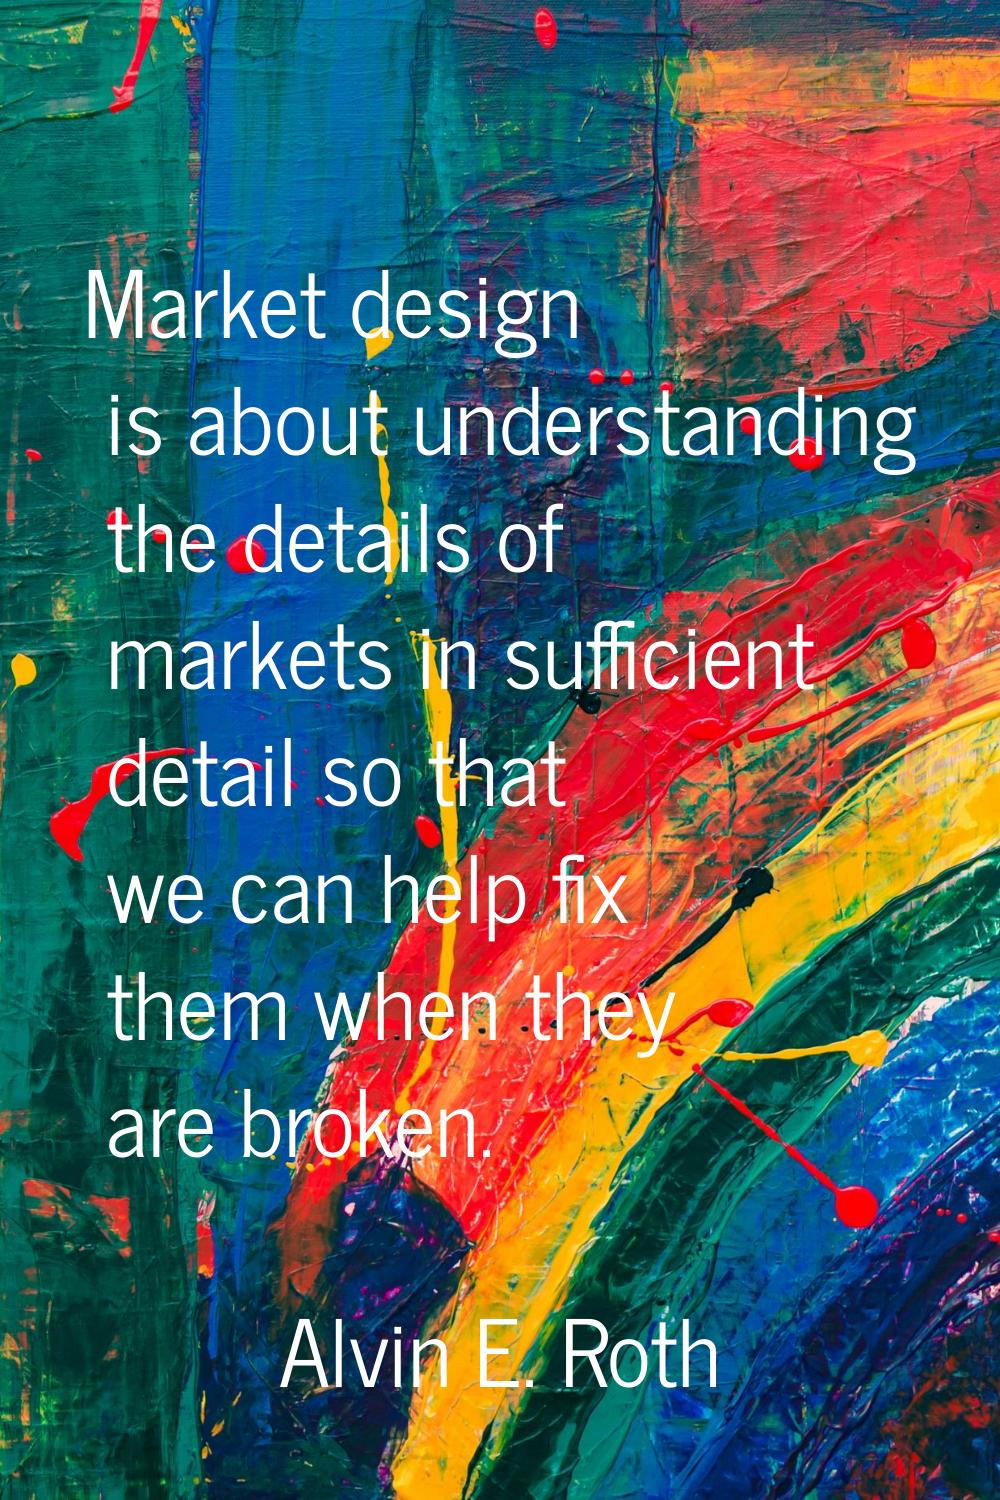 Market design is about understanding the details of markets in sufficient detail so that we can hel